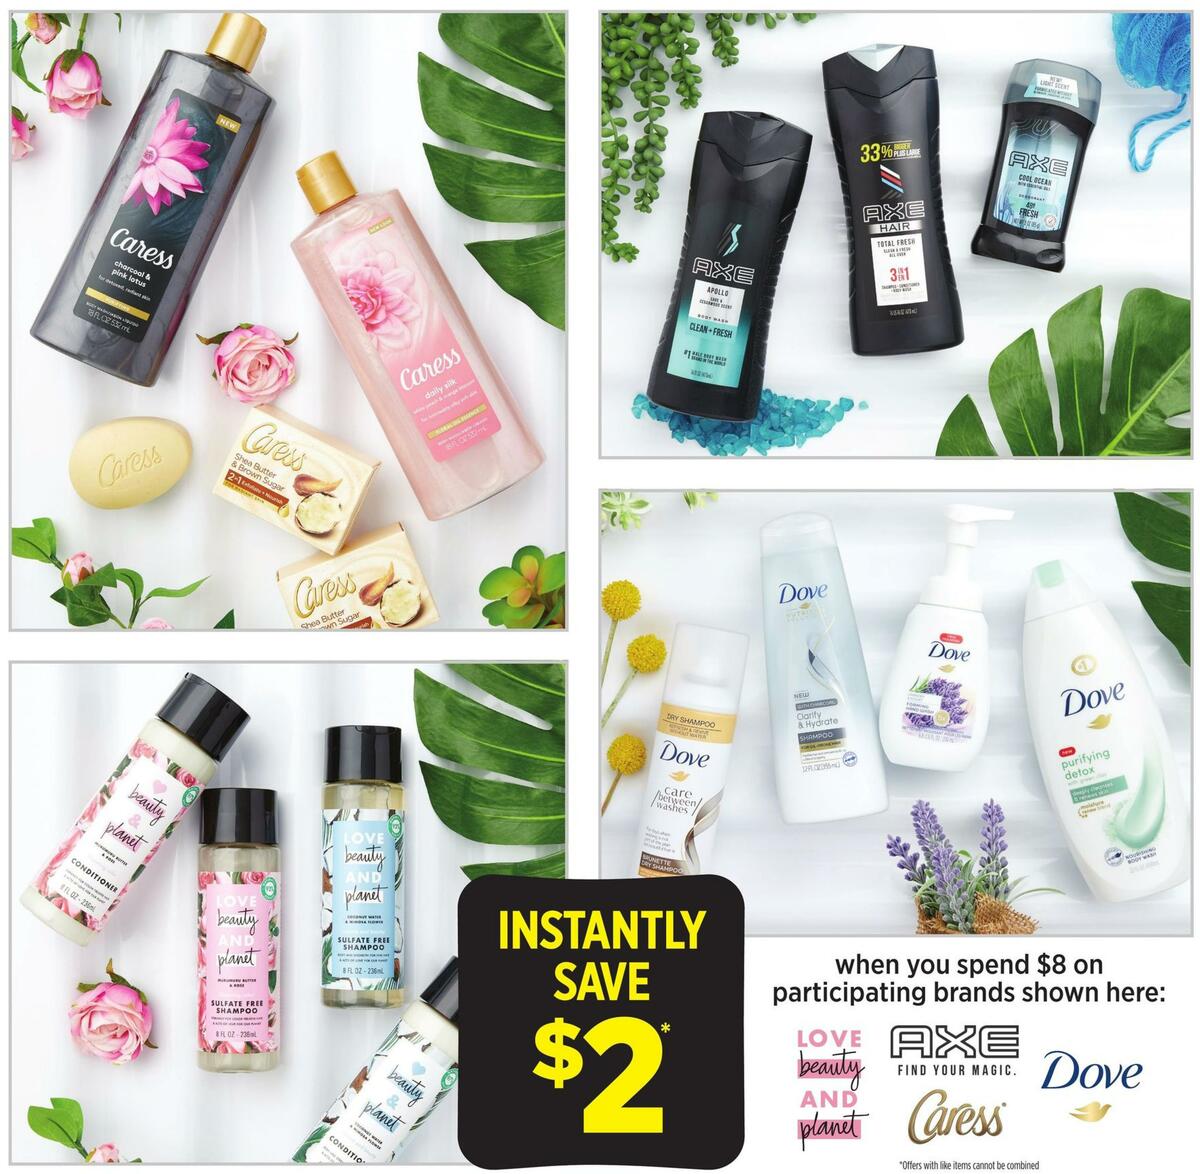 Dollar General Health & Beauty Savings Weekly Ad from March 15